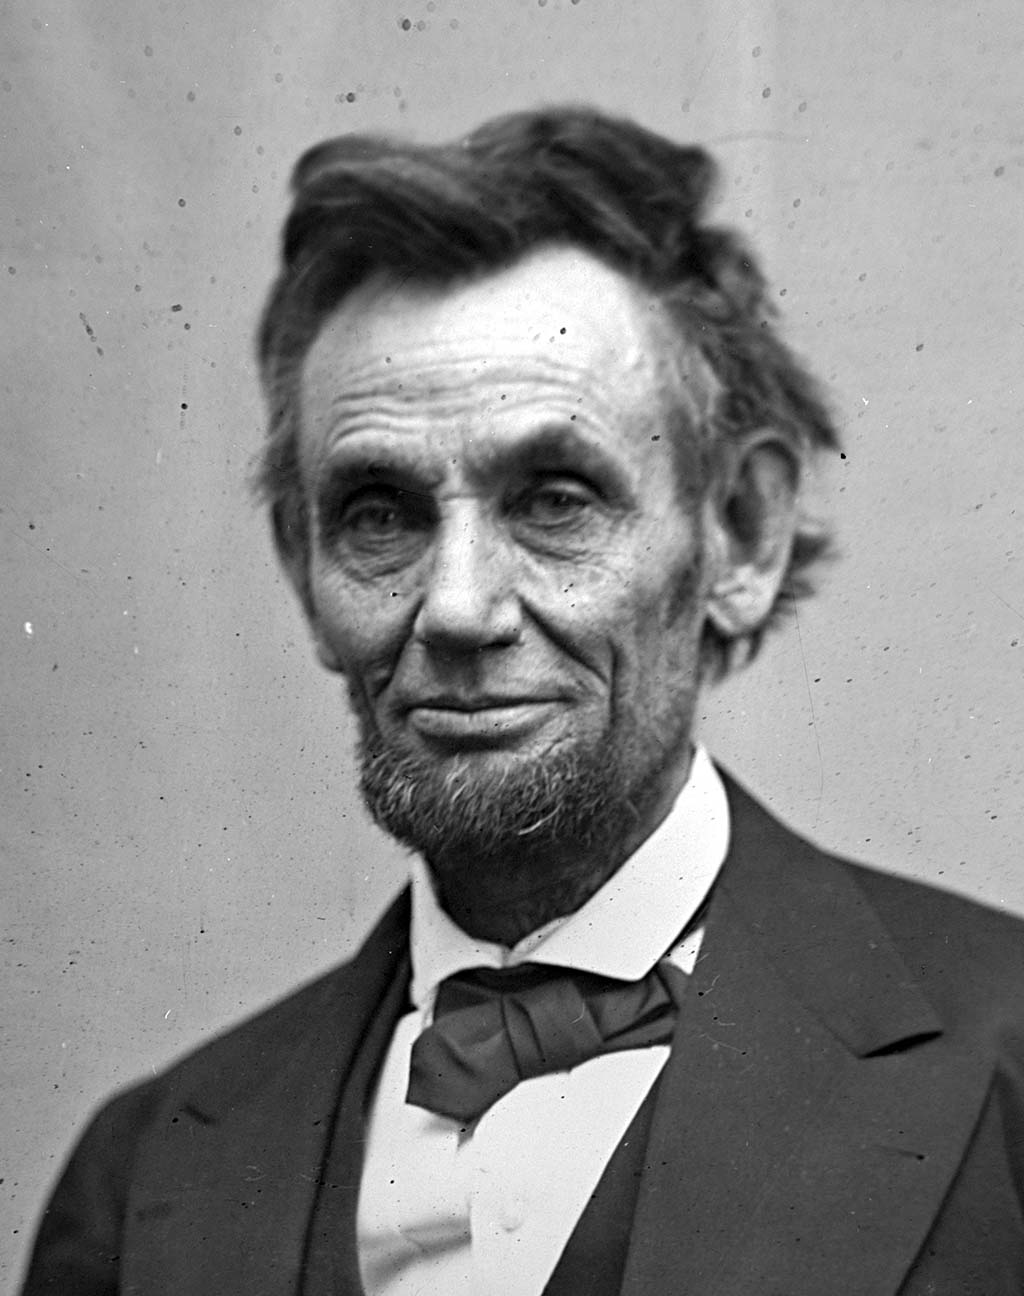 Did Black lives matter to Abraham Lincoln? It's complicated